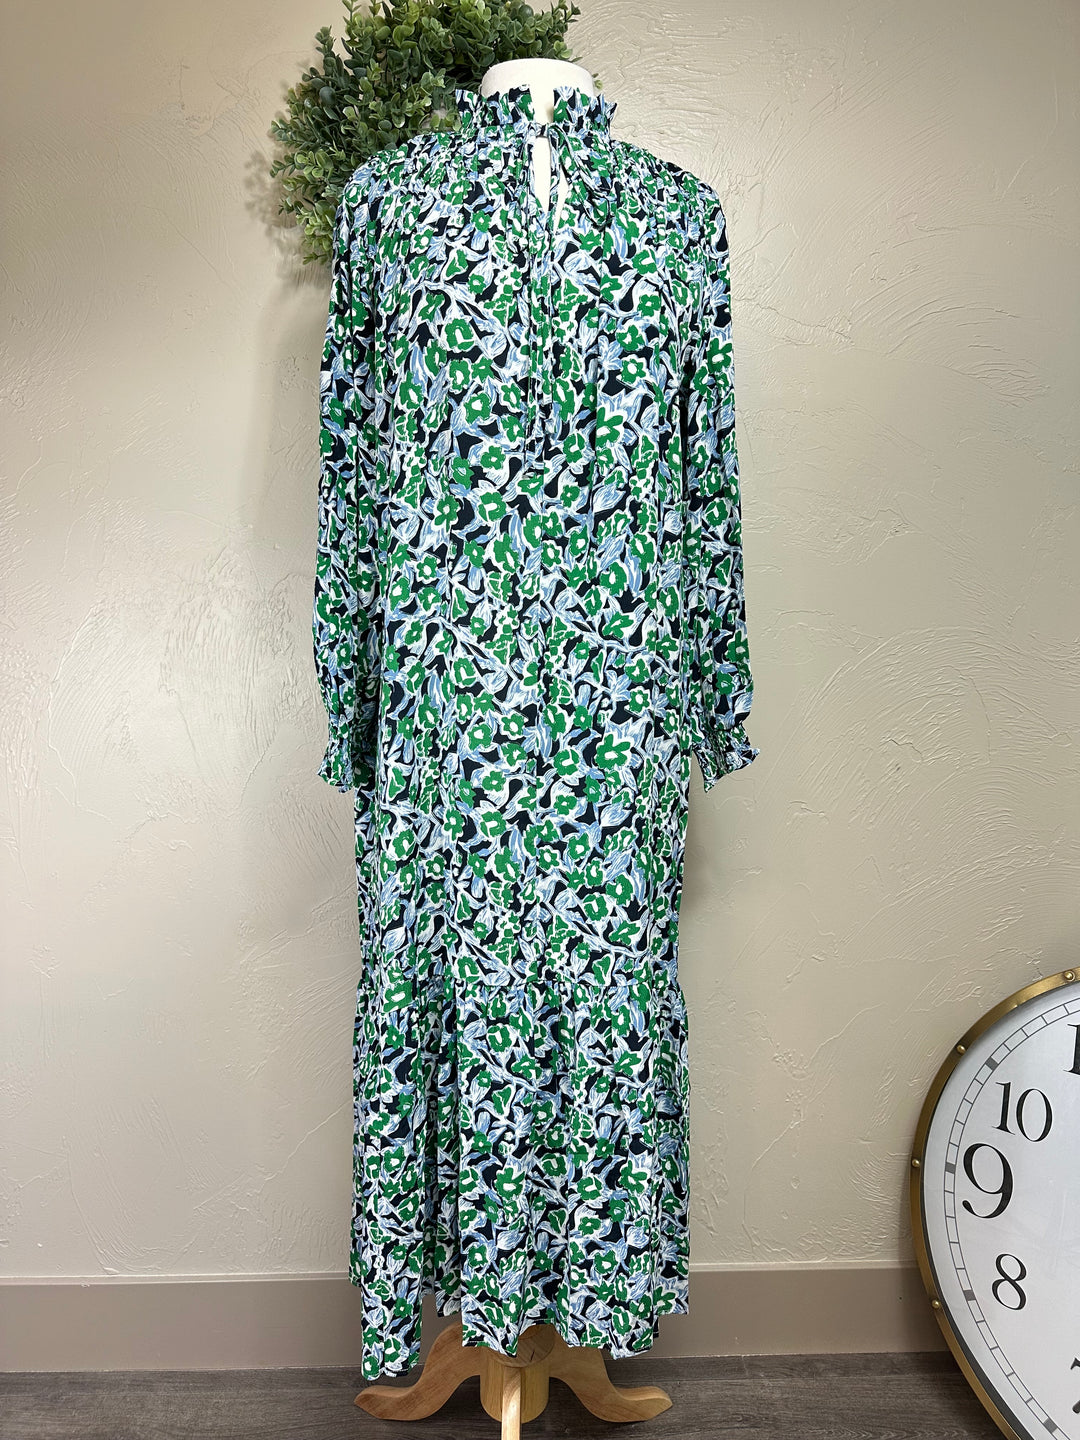 Liza Lou's Long Woven Maxi Dress Dark Navy/Black Background with Green Colors